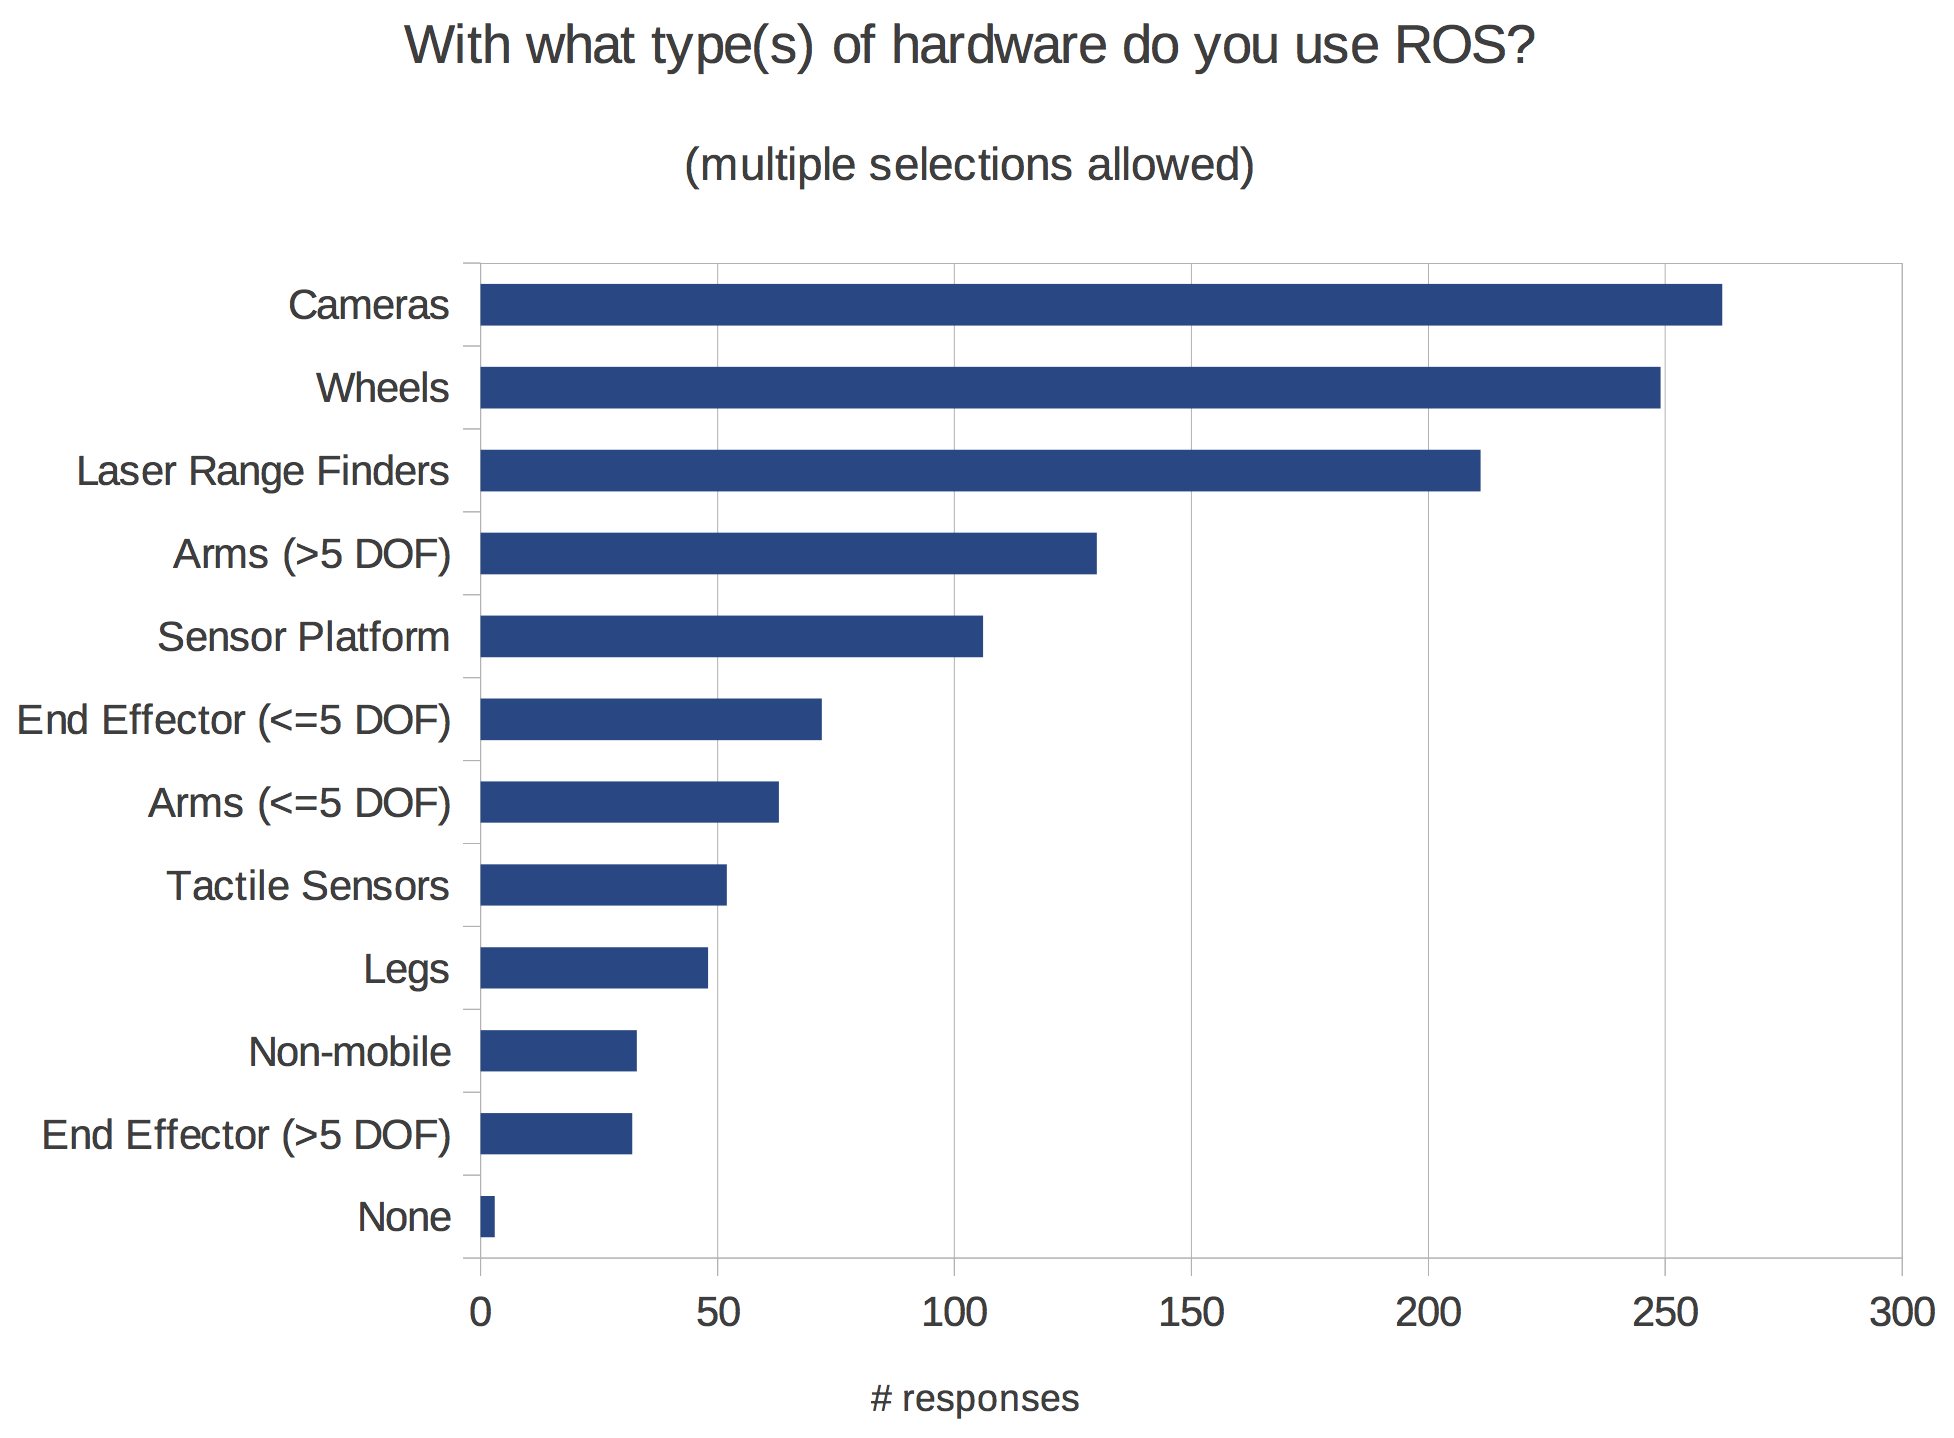 http://www.ros.org/news/2014/04/01/which-hardware.png